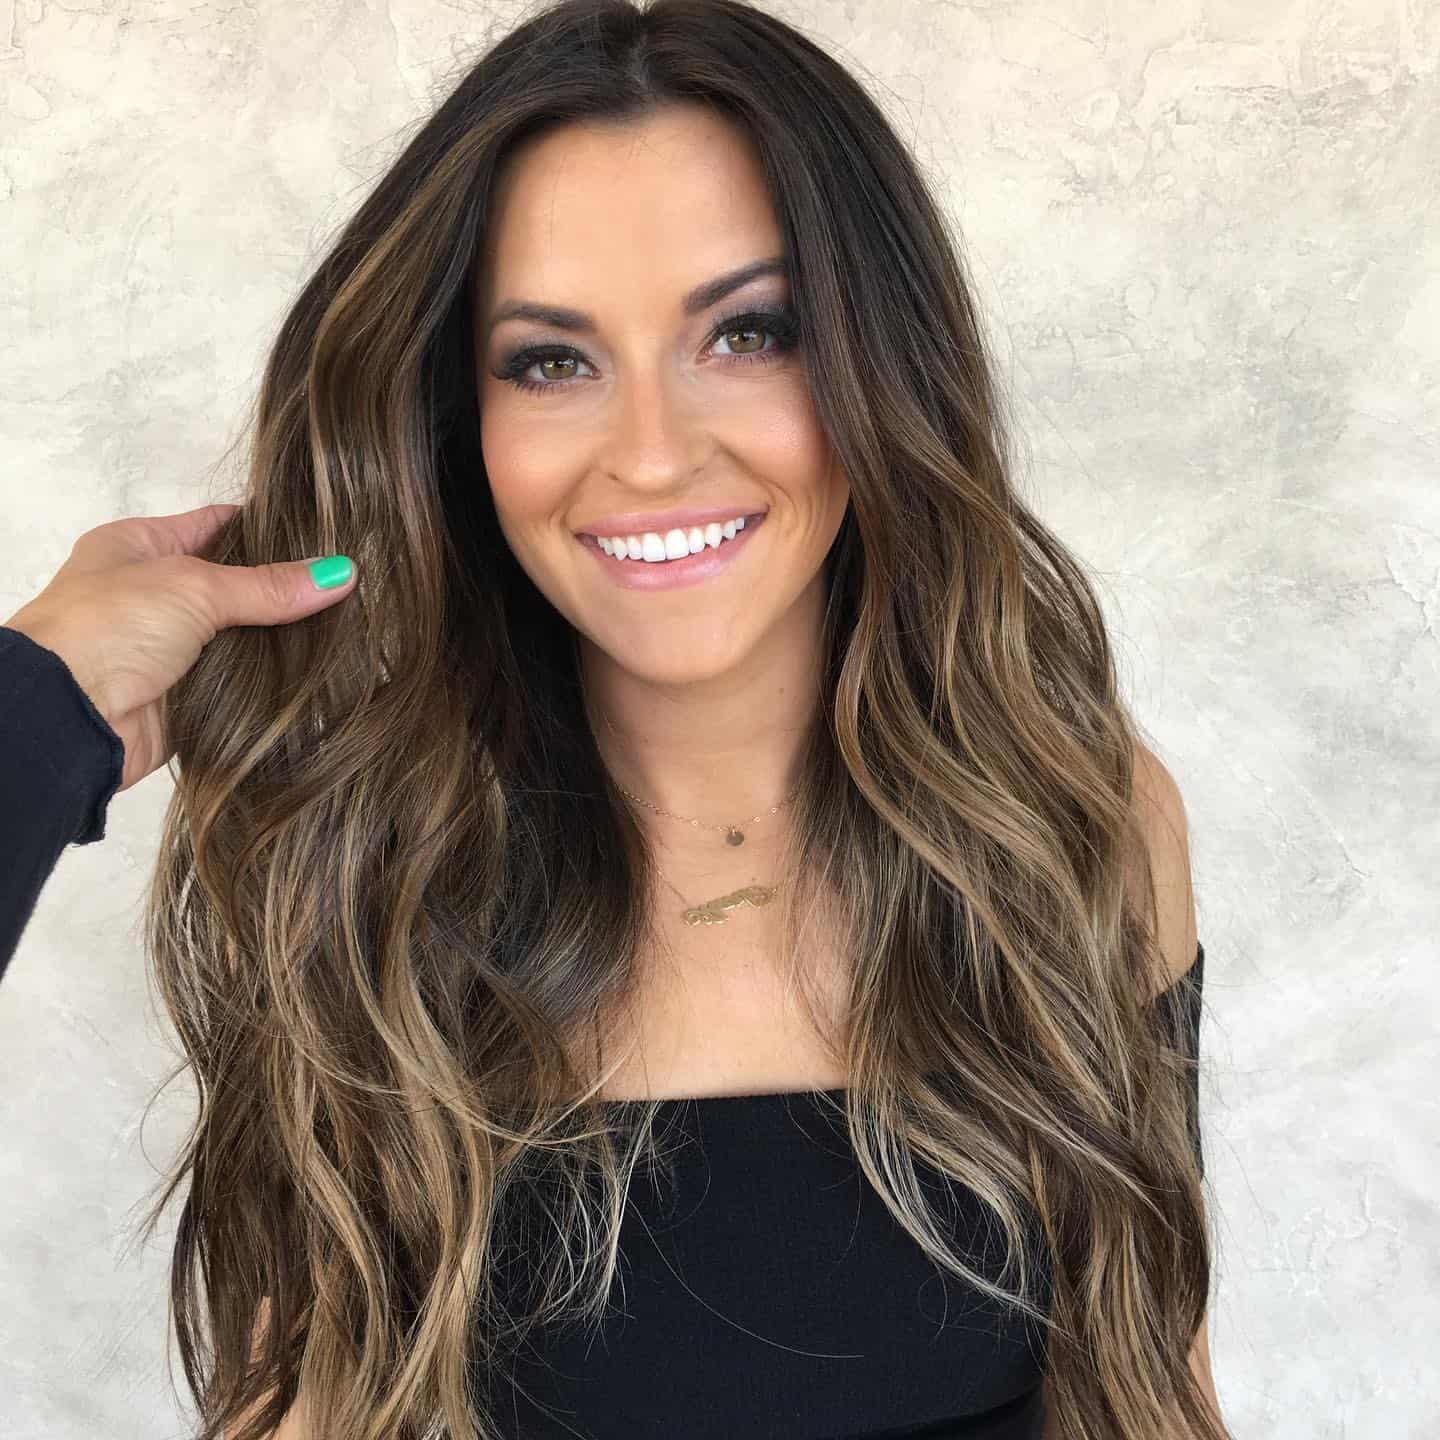 60+ Best Hairstyles Trends To Try In 2020